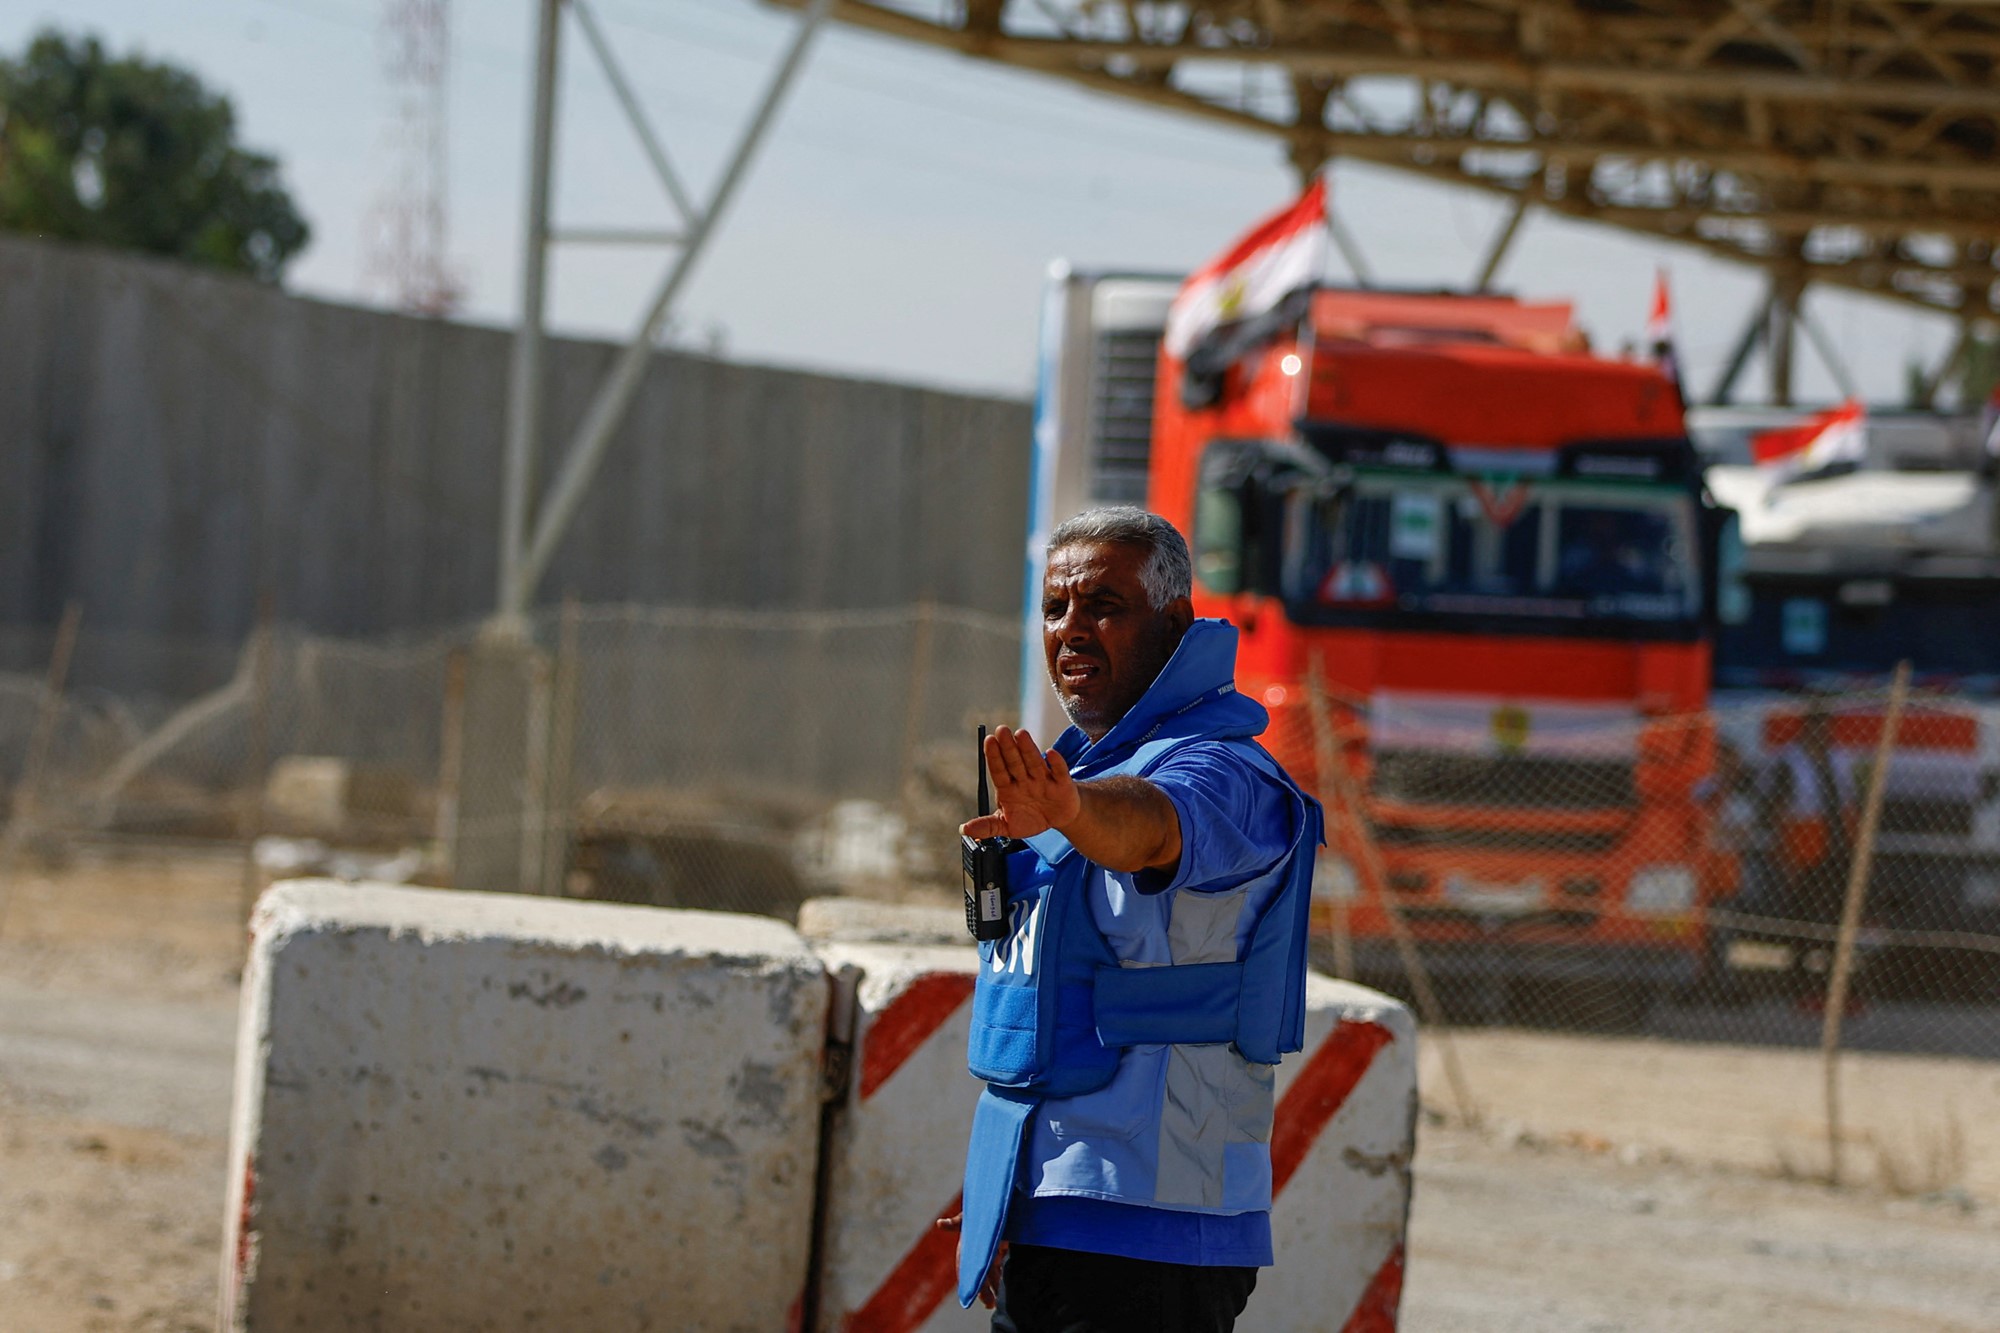 A UN worker in a blue vest gestures in front of an orange truck.